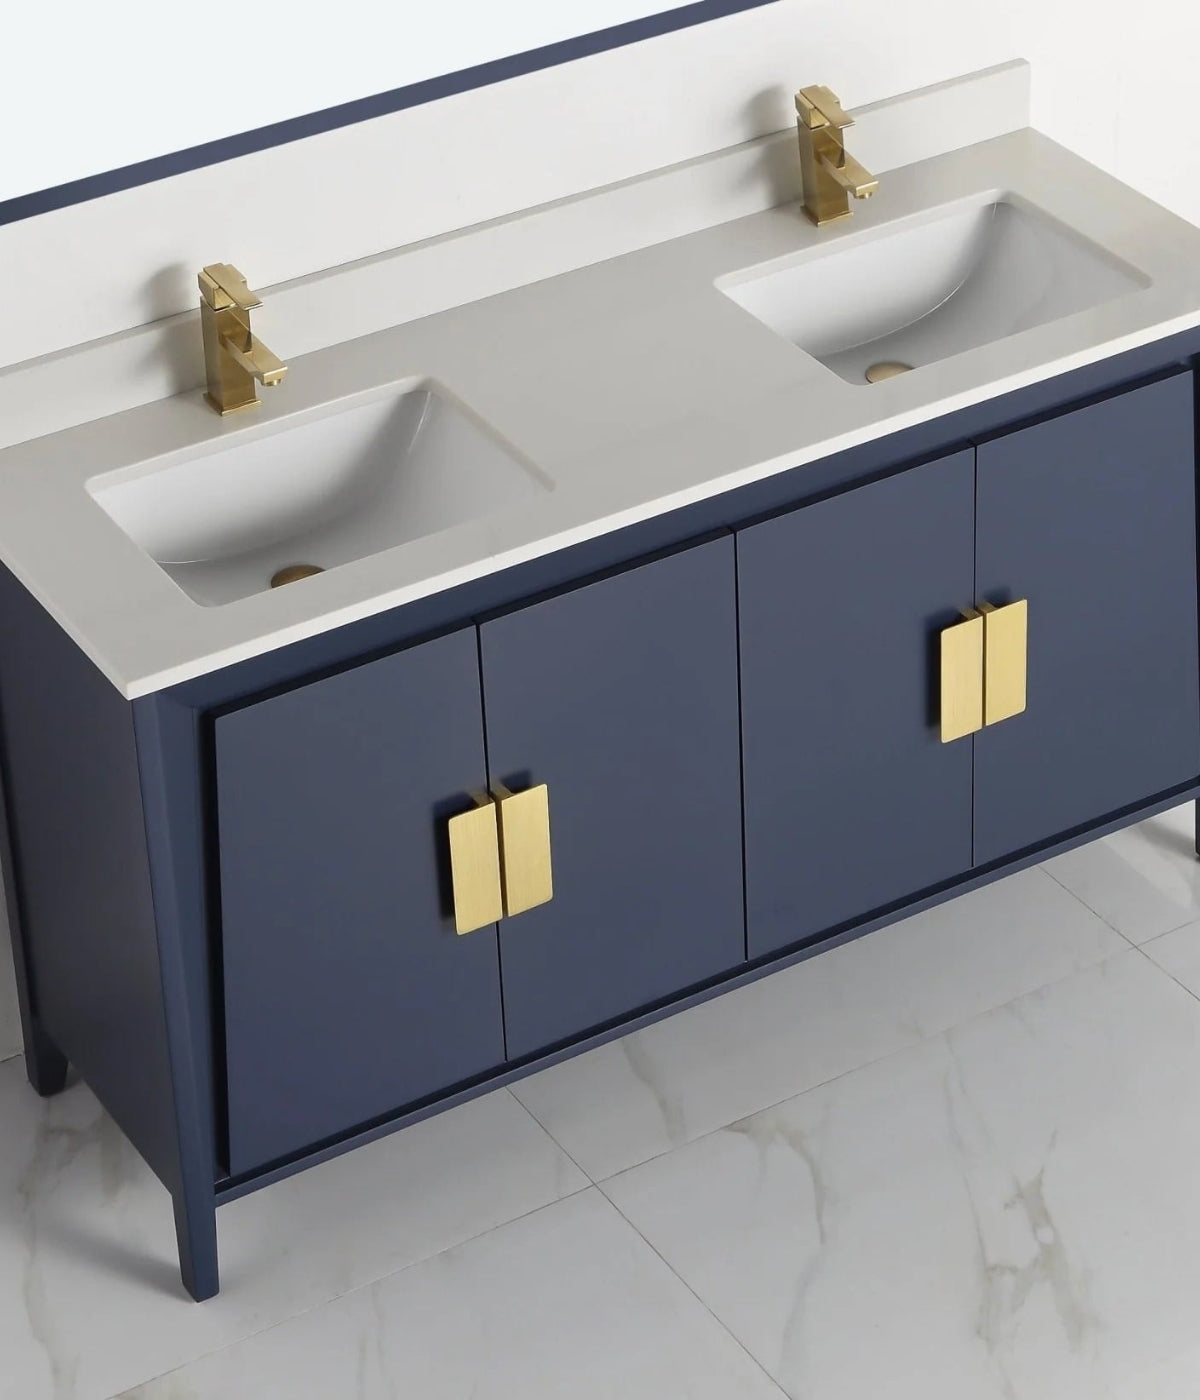 The masterpiece is the larvottoe 60 inch bathroom wood vanity from chans furniture